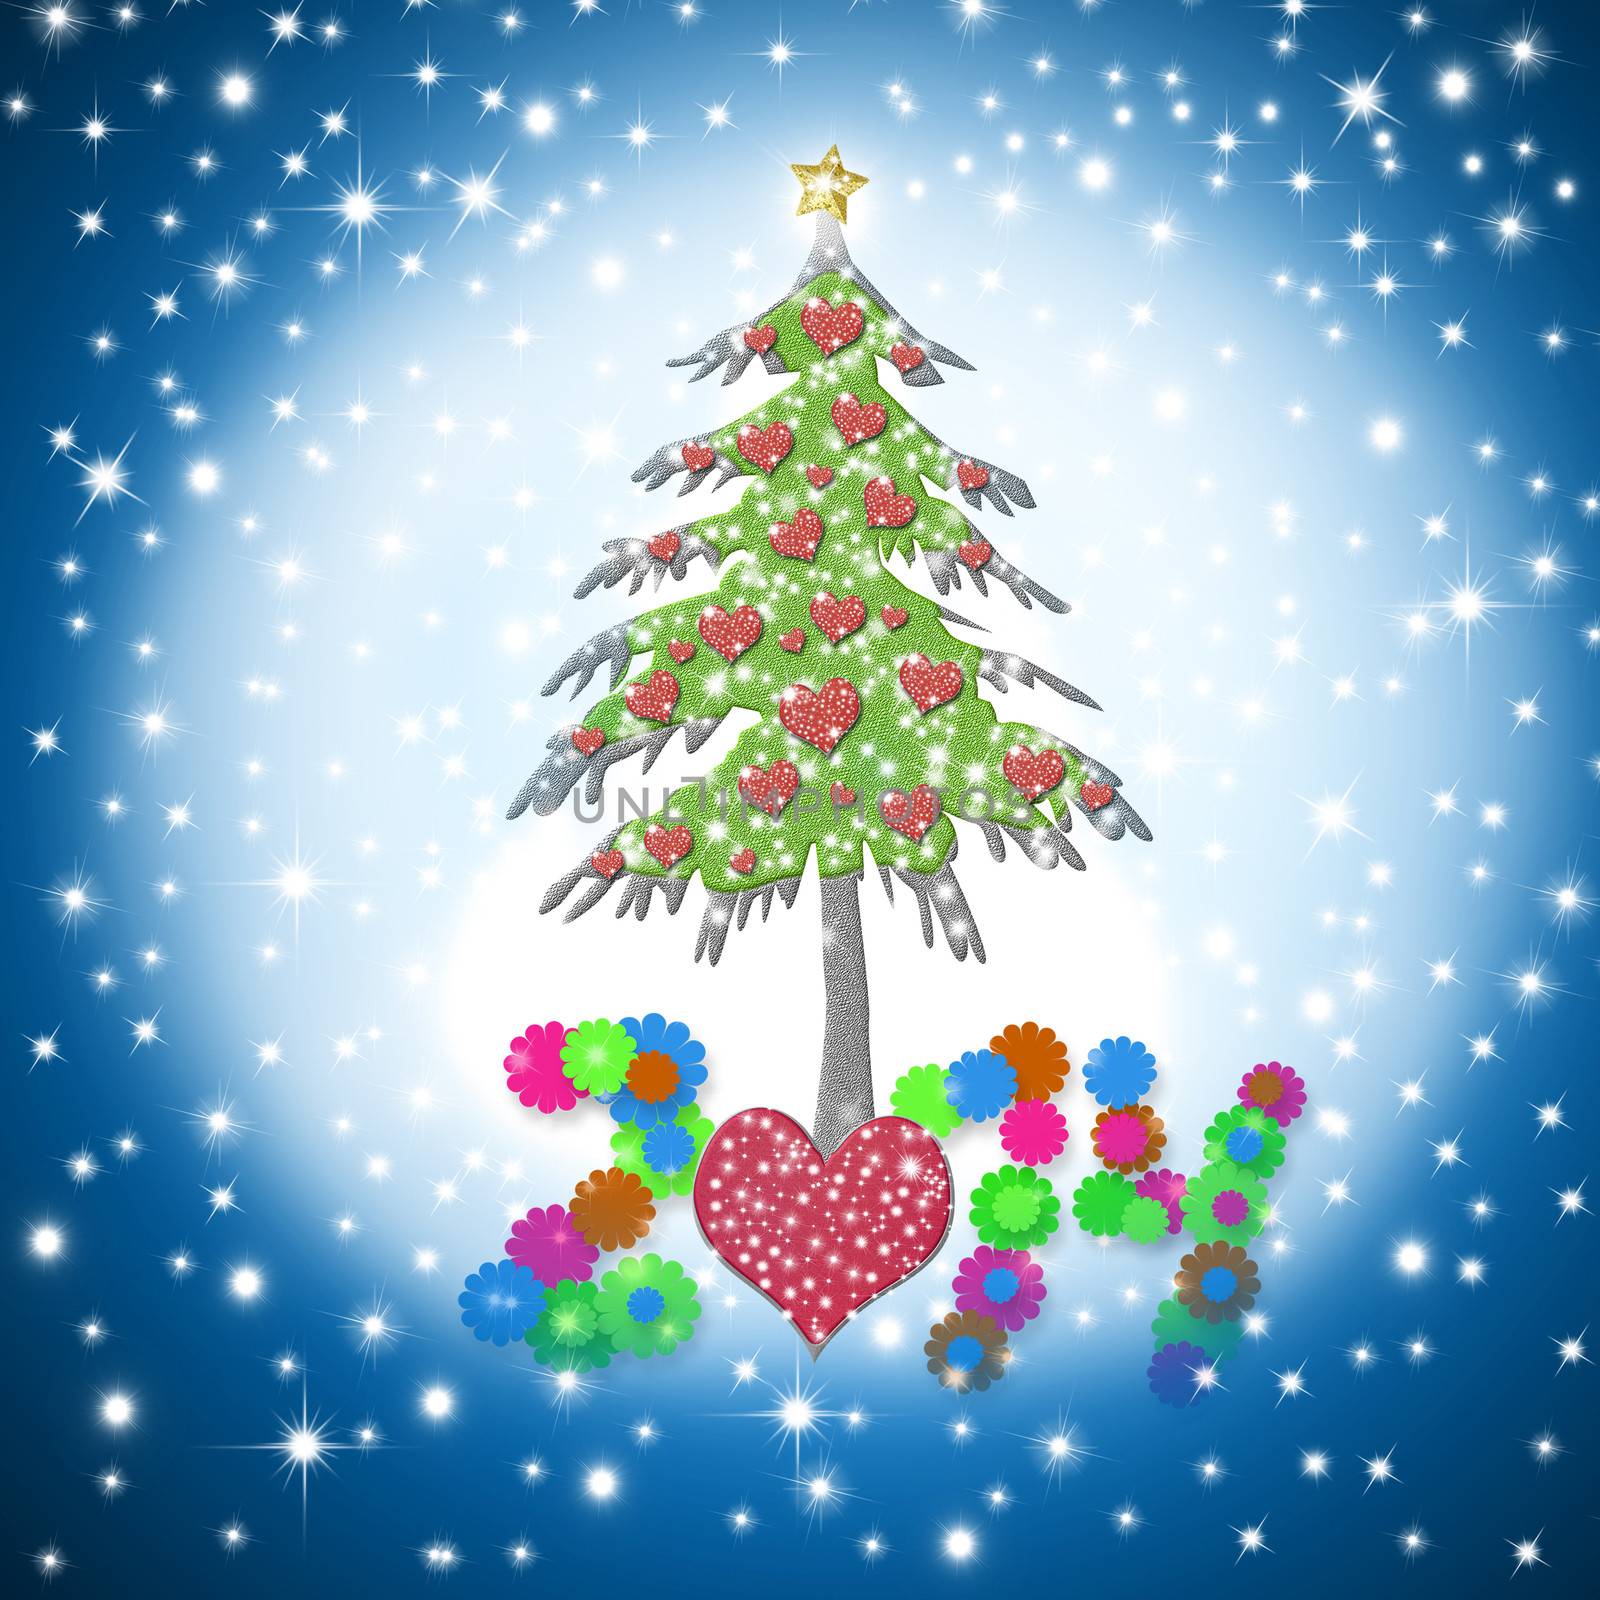 beautiful Christmas card 2014 with shiny hearts tree  by Carche